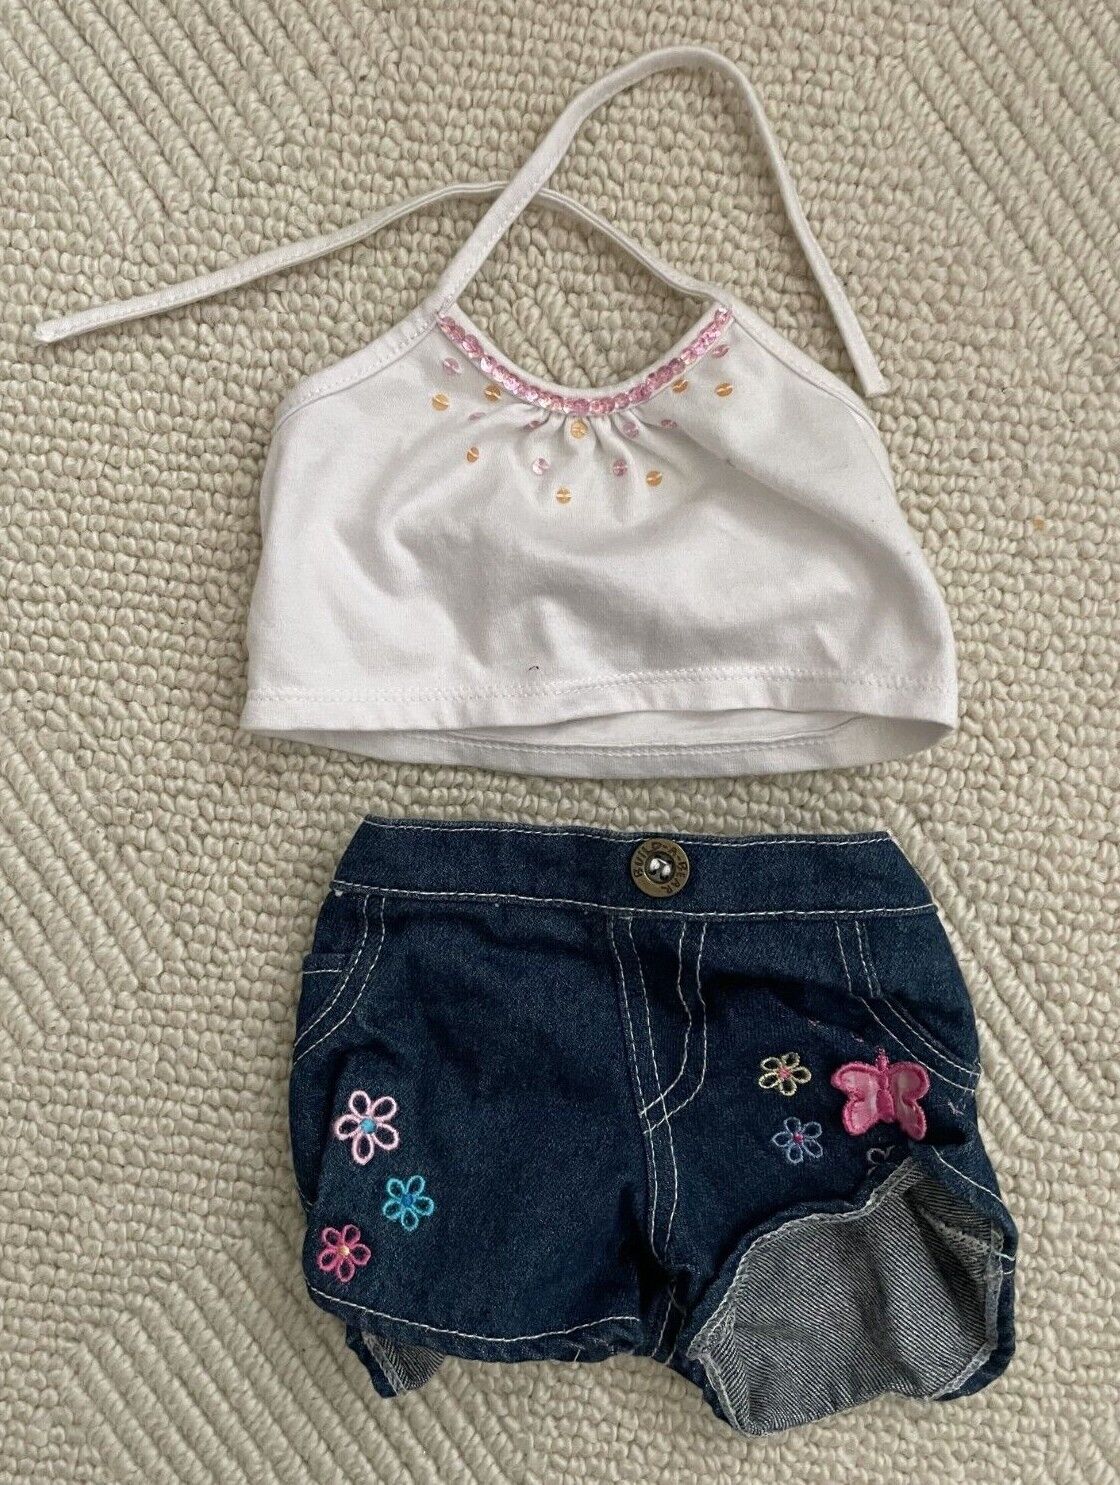 Build A Bear Outfit Halter Tank Top and Shorts 2pc Set Build-A-Bear Workshop